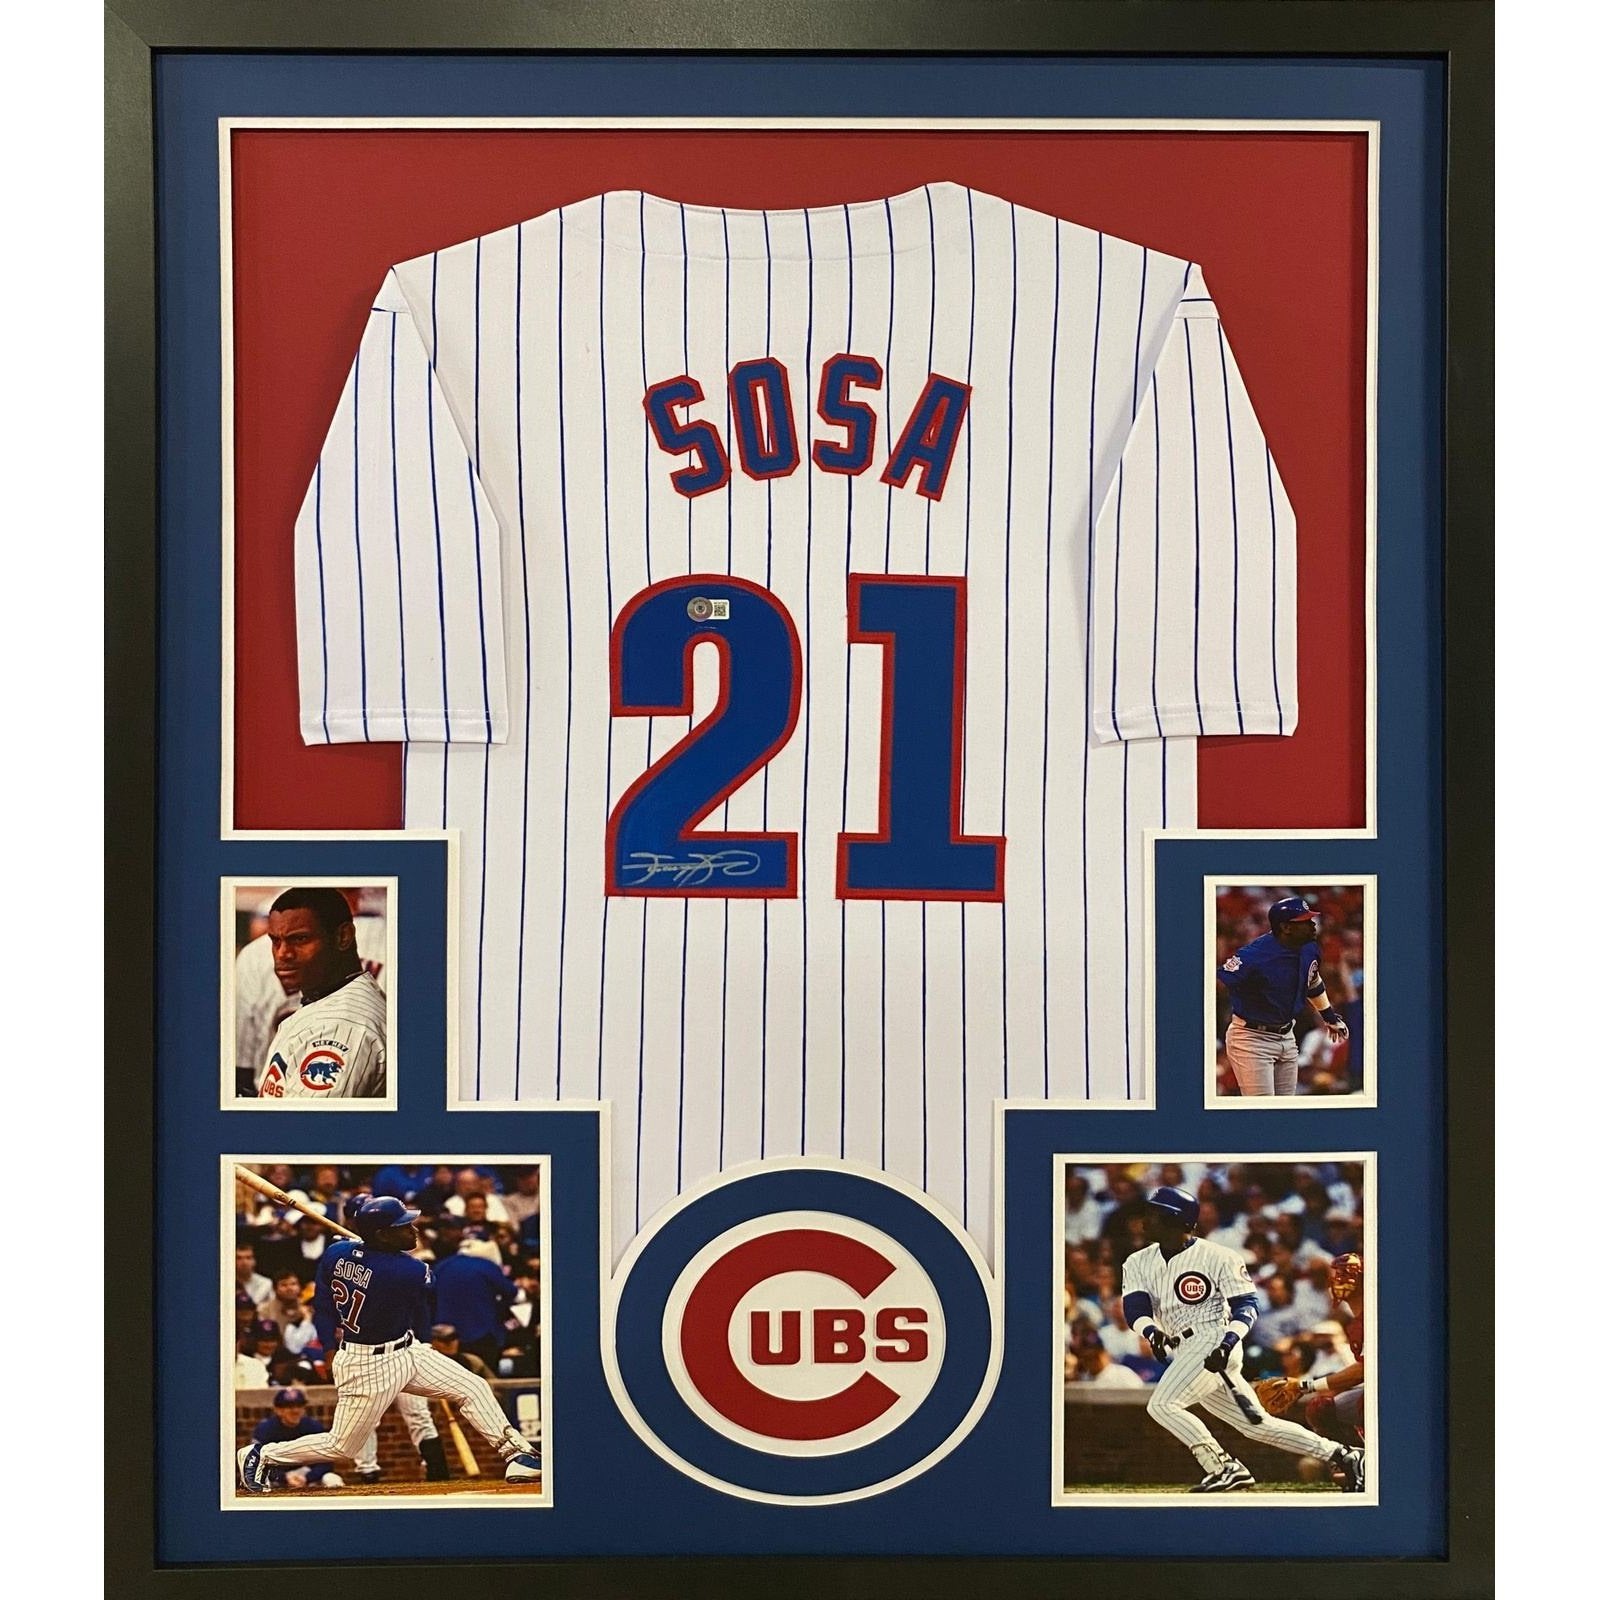 chicago cubs sosa jersey